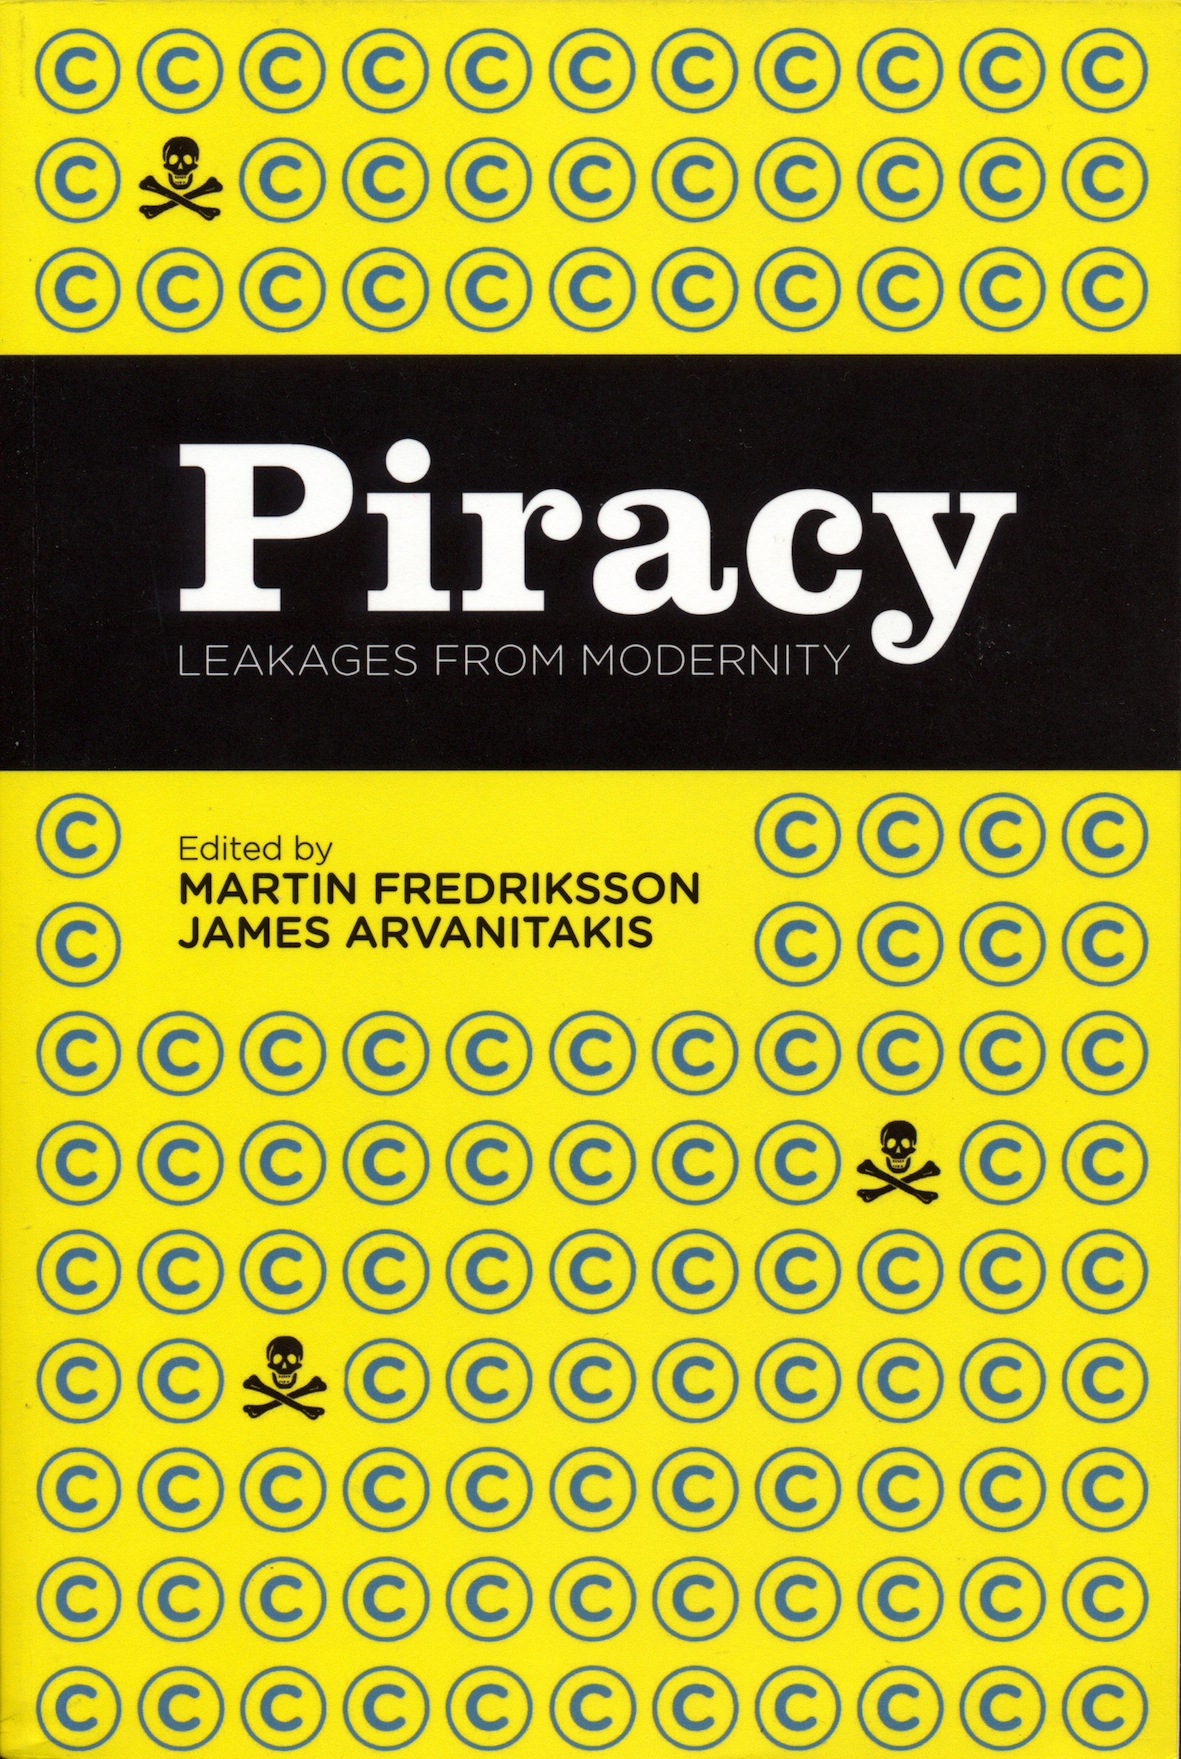 (edited by) Martin Fredriksson, James Arvanitakis Piracy- Leakages from Modernity.